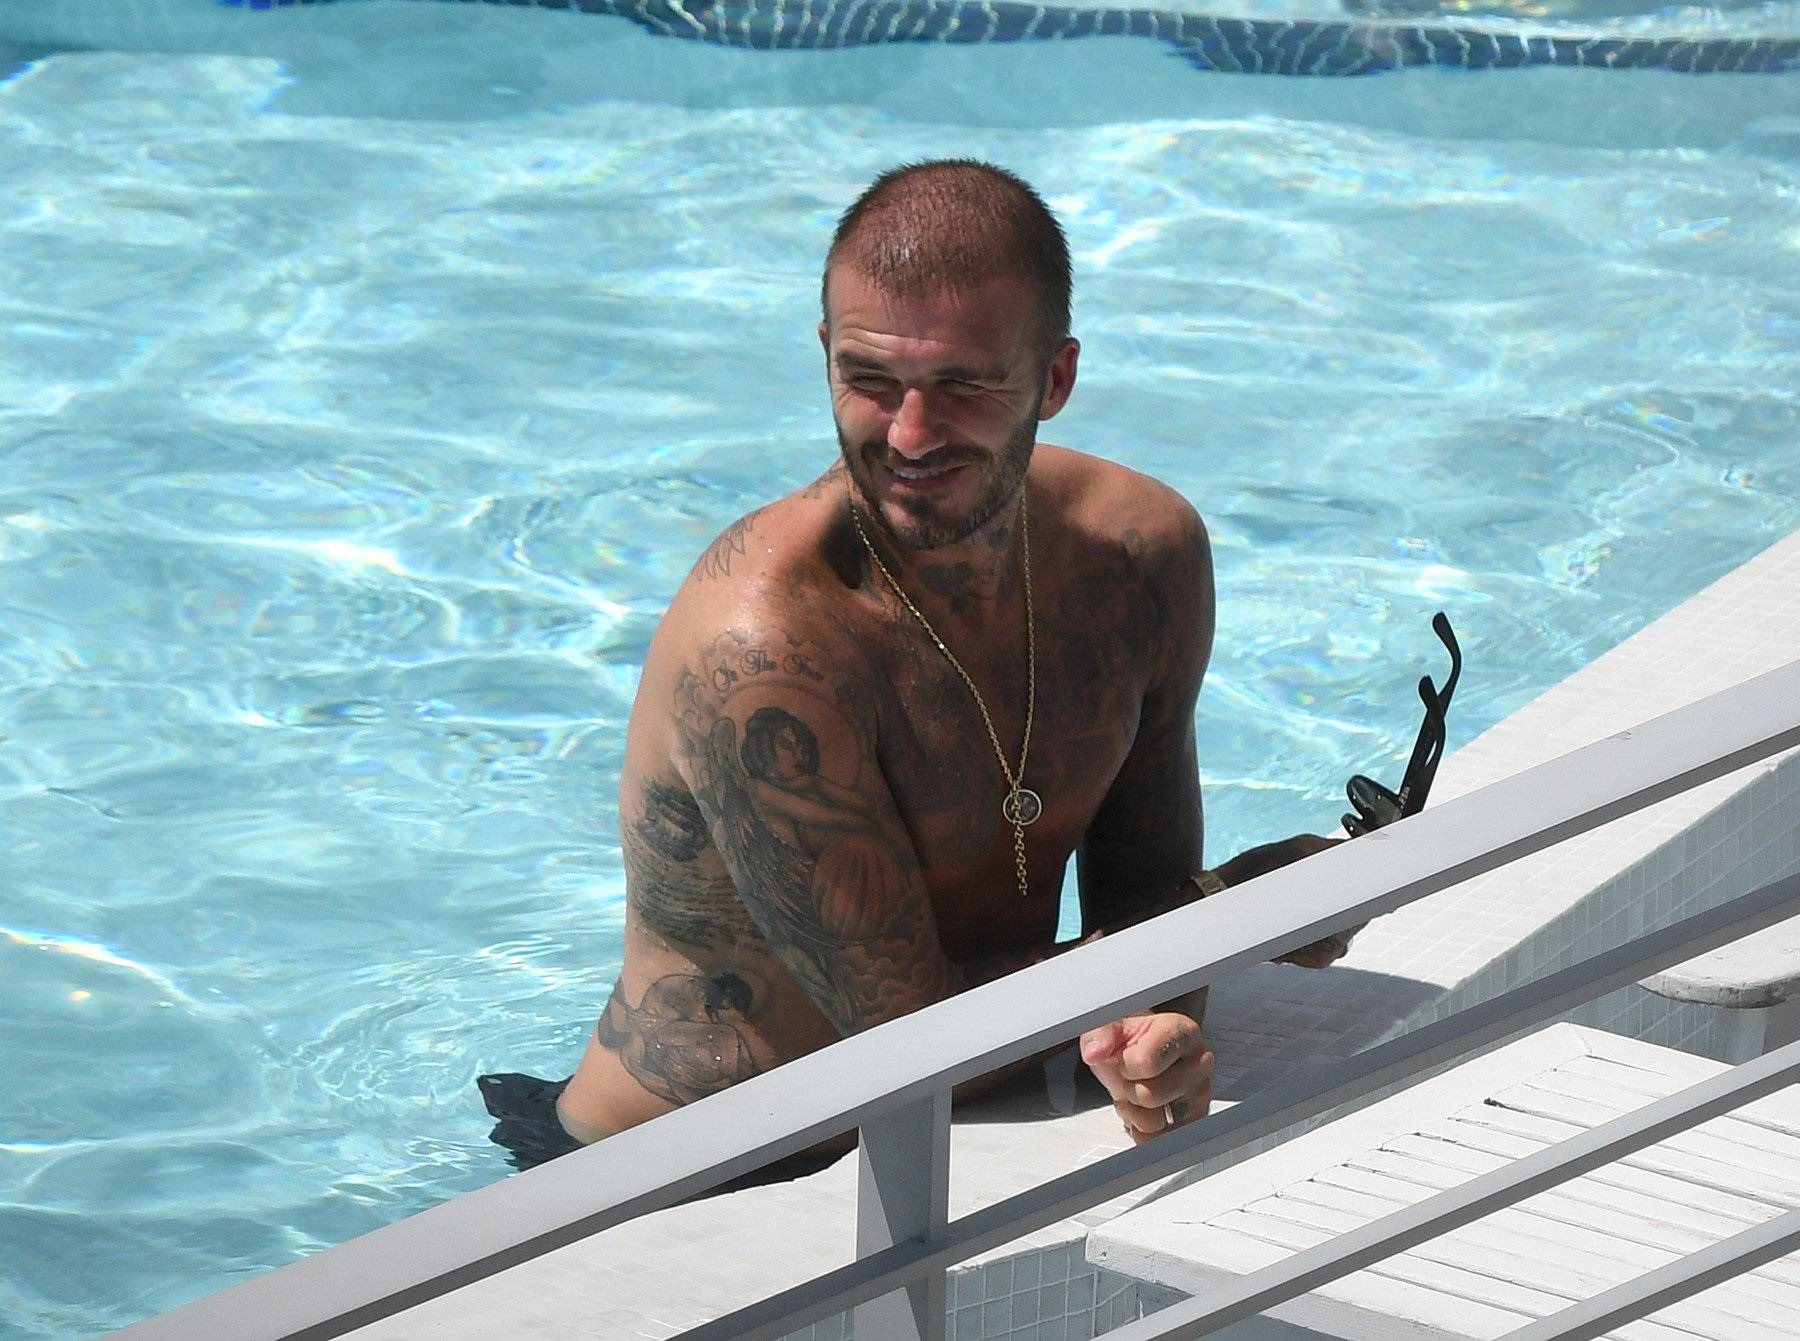 Shirtless David Beckham celebrates his new team, Inter Miami, as he has a few cocktails and takes a dip in the pool in Miami